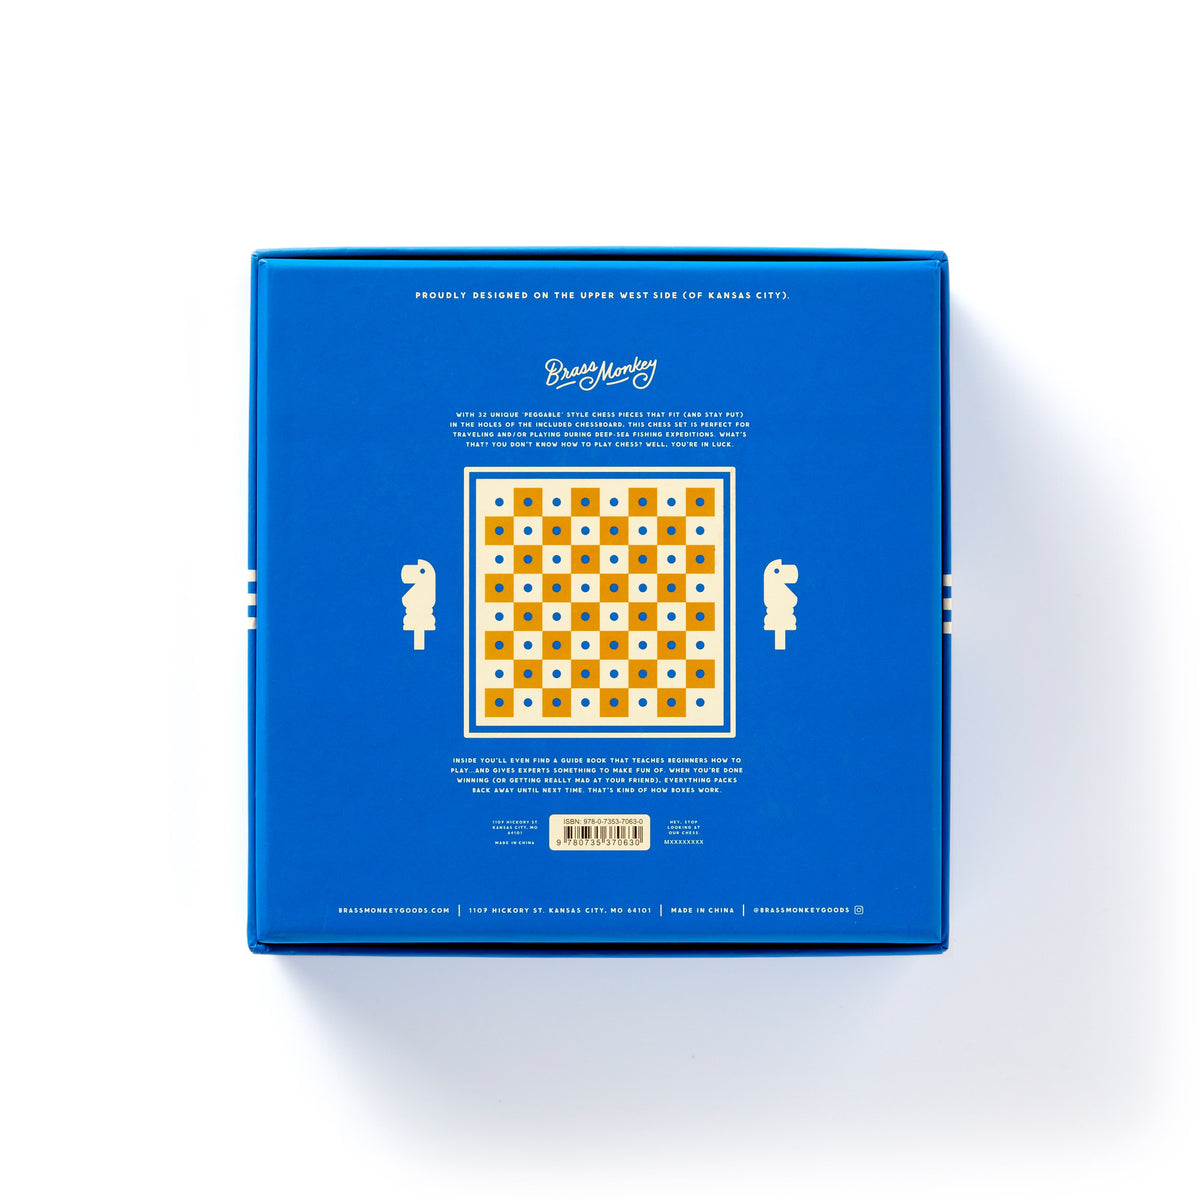 Chess Games Greeting Card for Sale by Utopipia